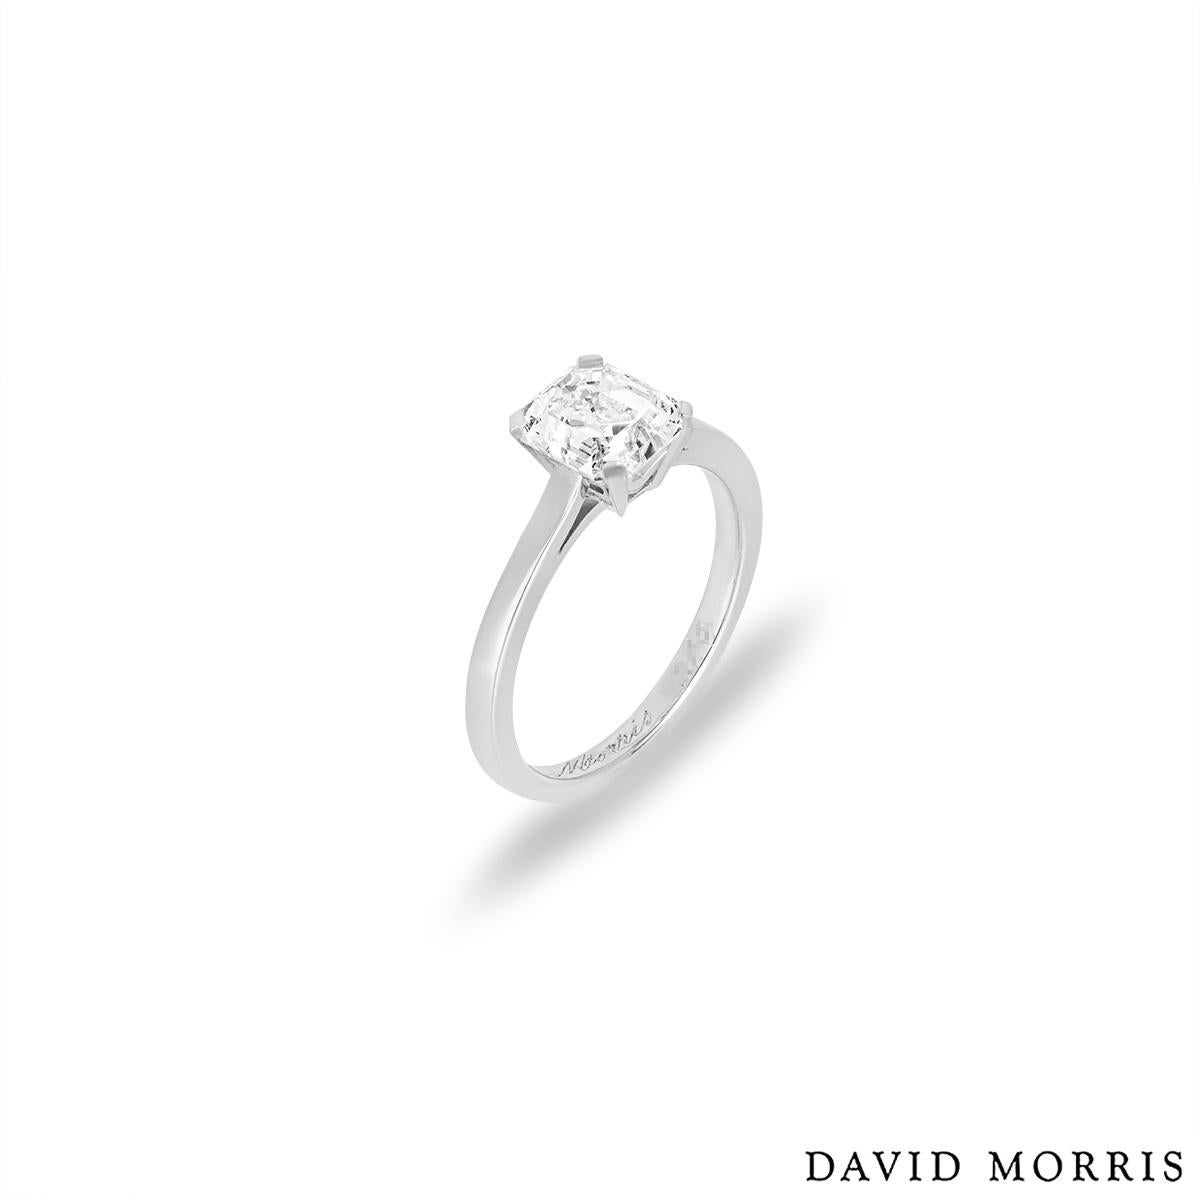 A stunning platinum emerald cut diamond ring by David Morris. The ring comprises of an emerald cut diamond in a four claw setting with a weight of 1.73ct, is D colour and is VS2 clarity. The ring is currently a size UK M - EU 52 - US 6 but can be